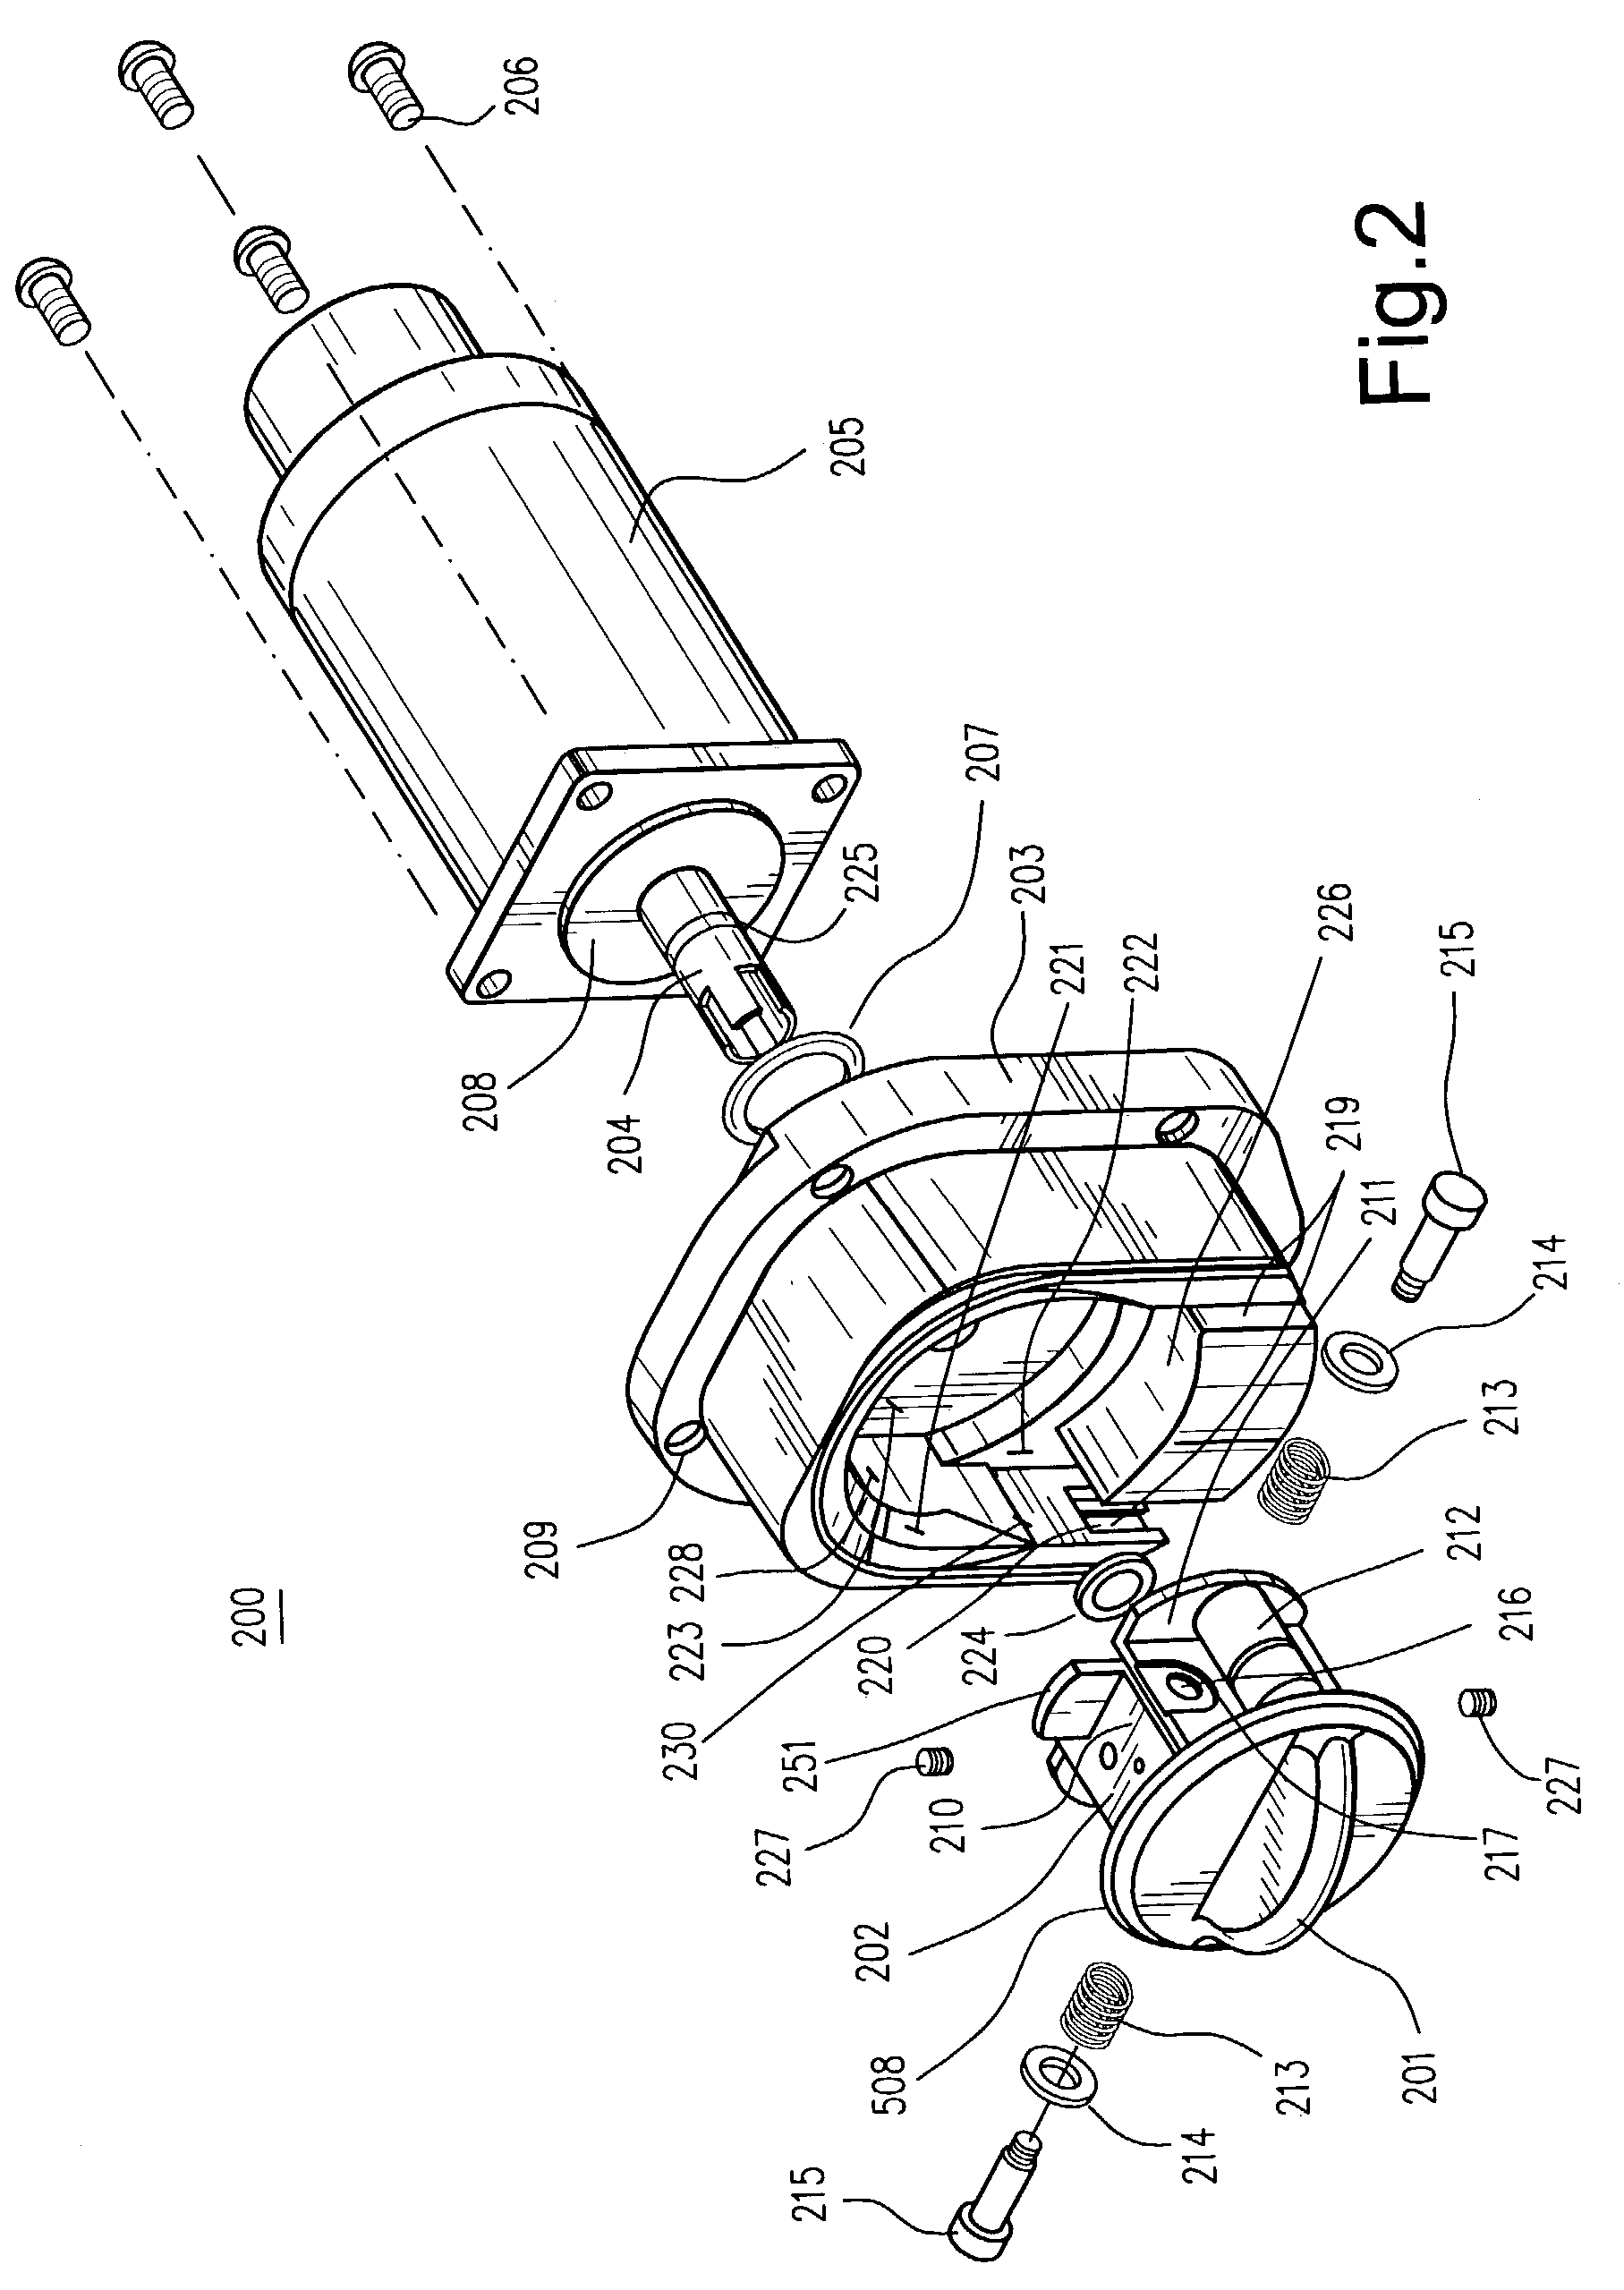 Self-loading peristaltic pump for extracorporeal blood circuit